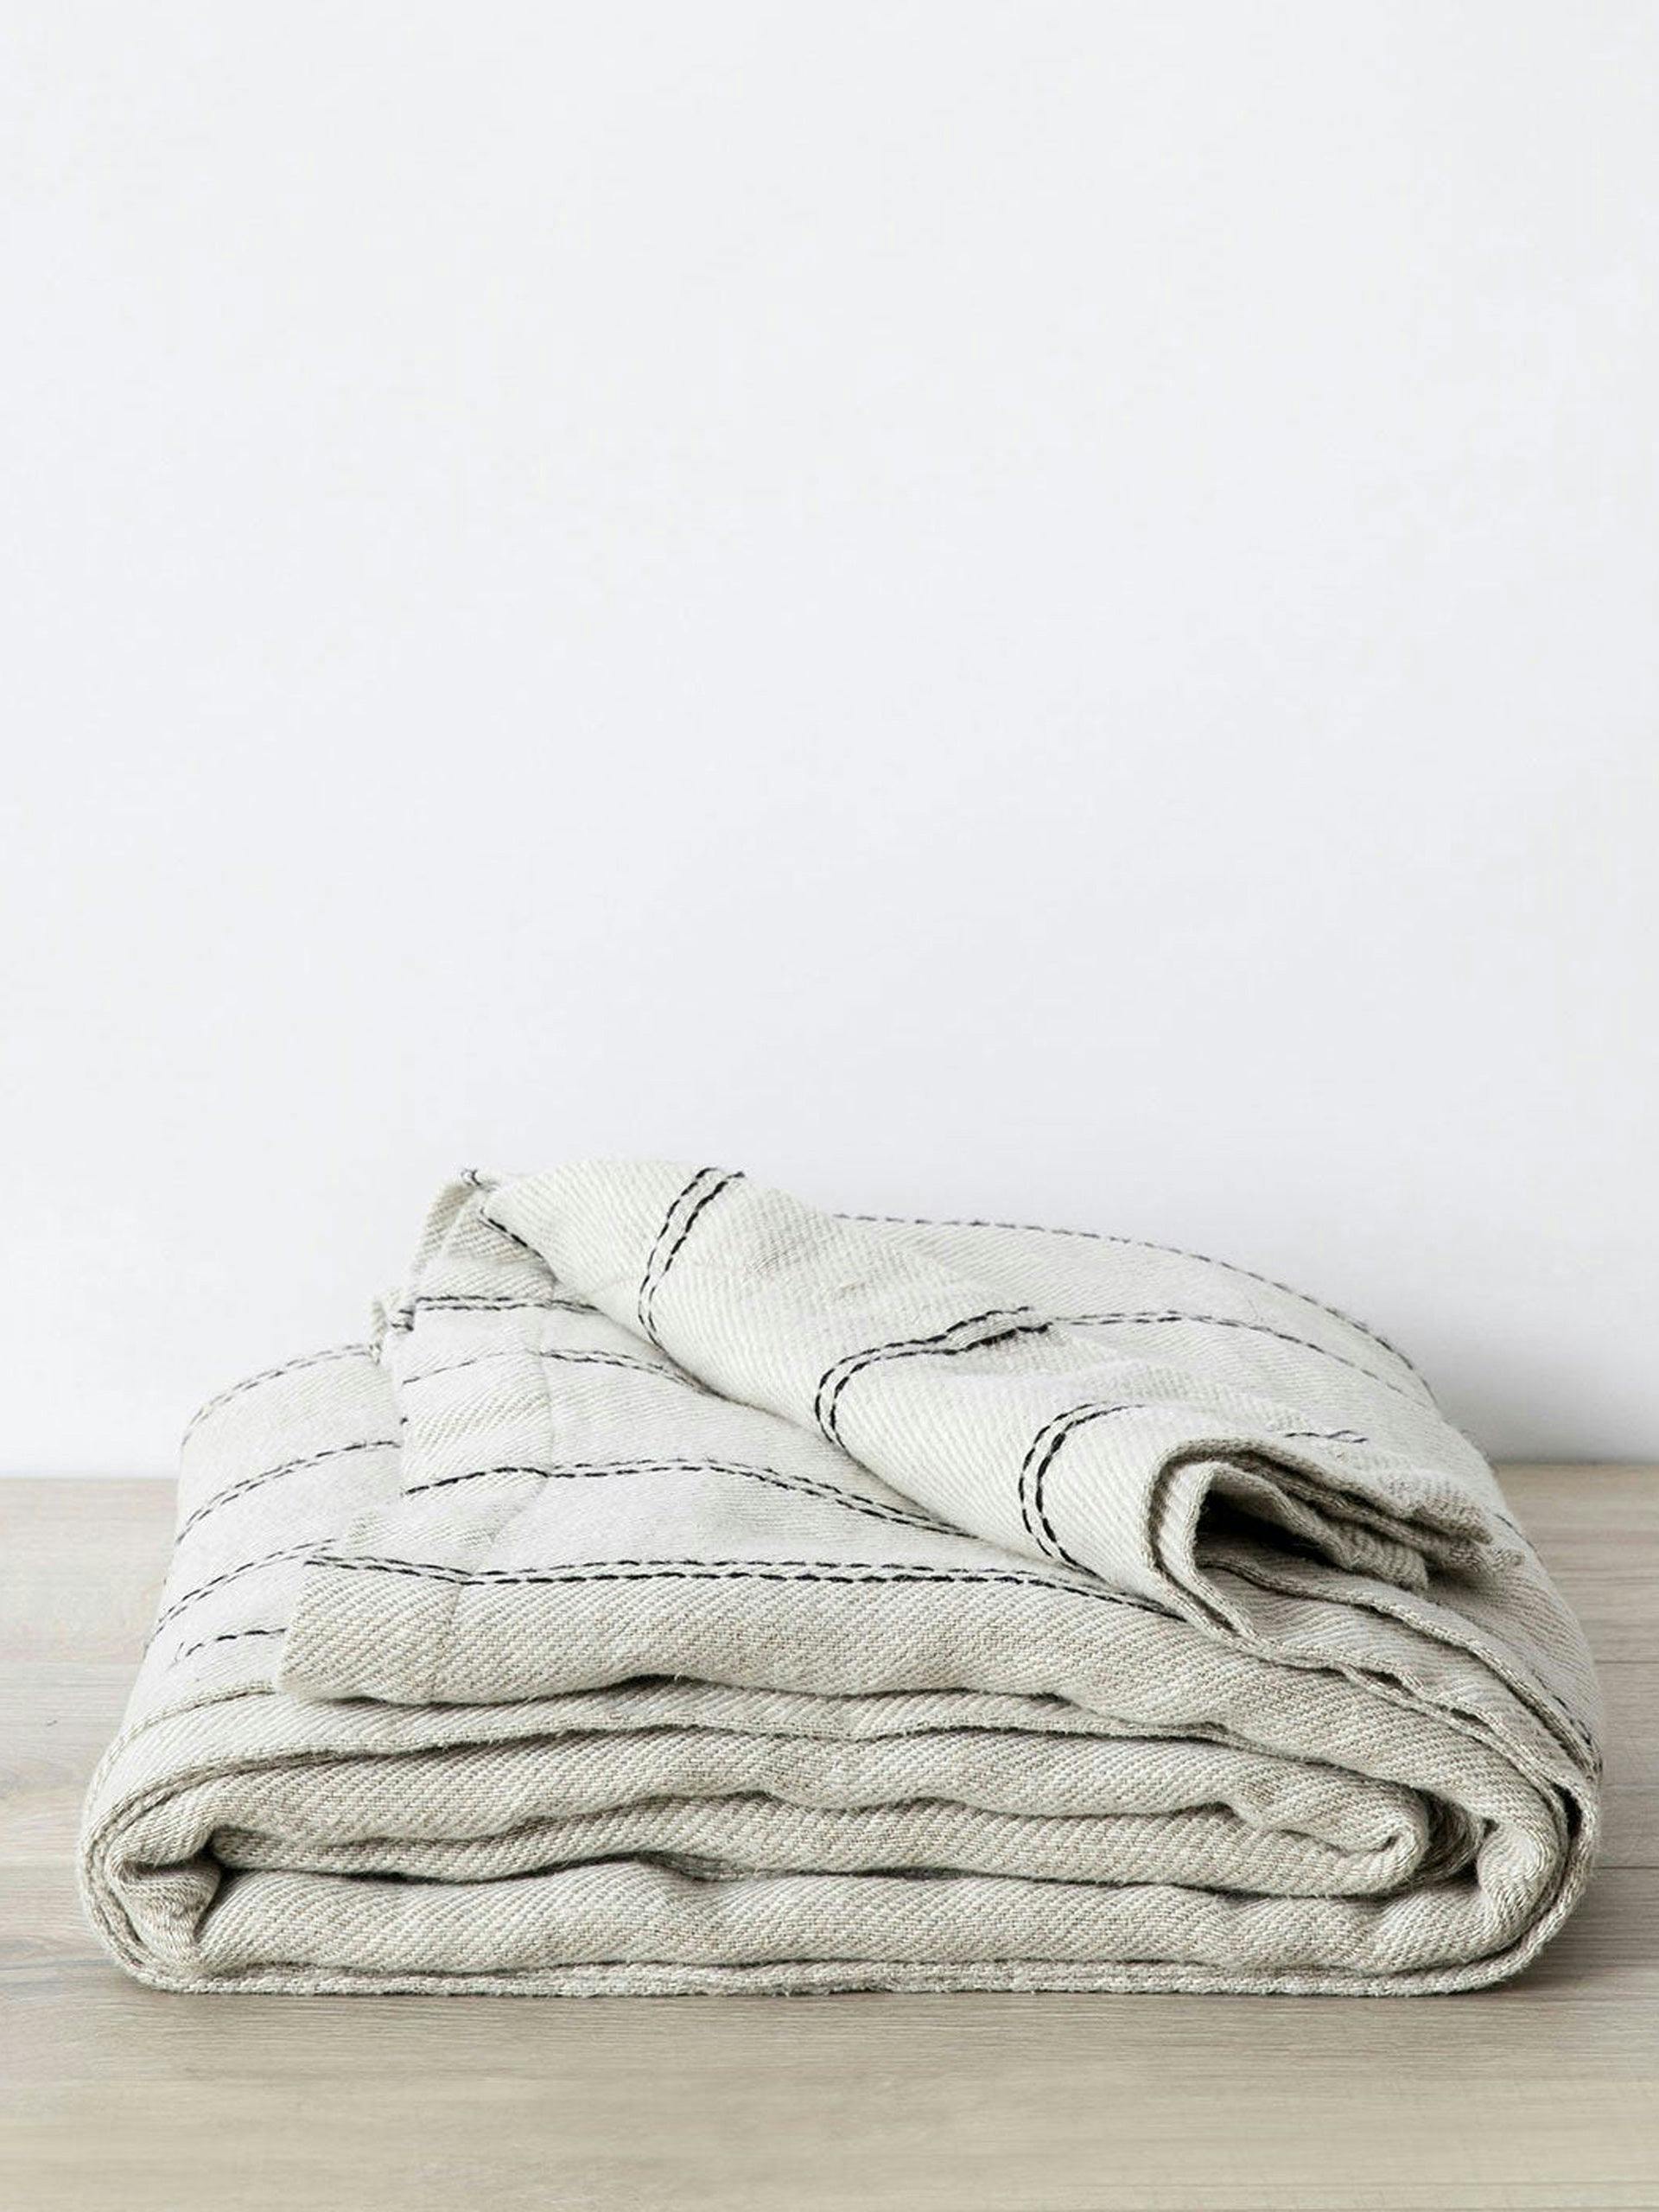 White and black stripes Mira linen bedcover - Ana